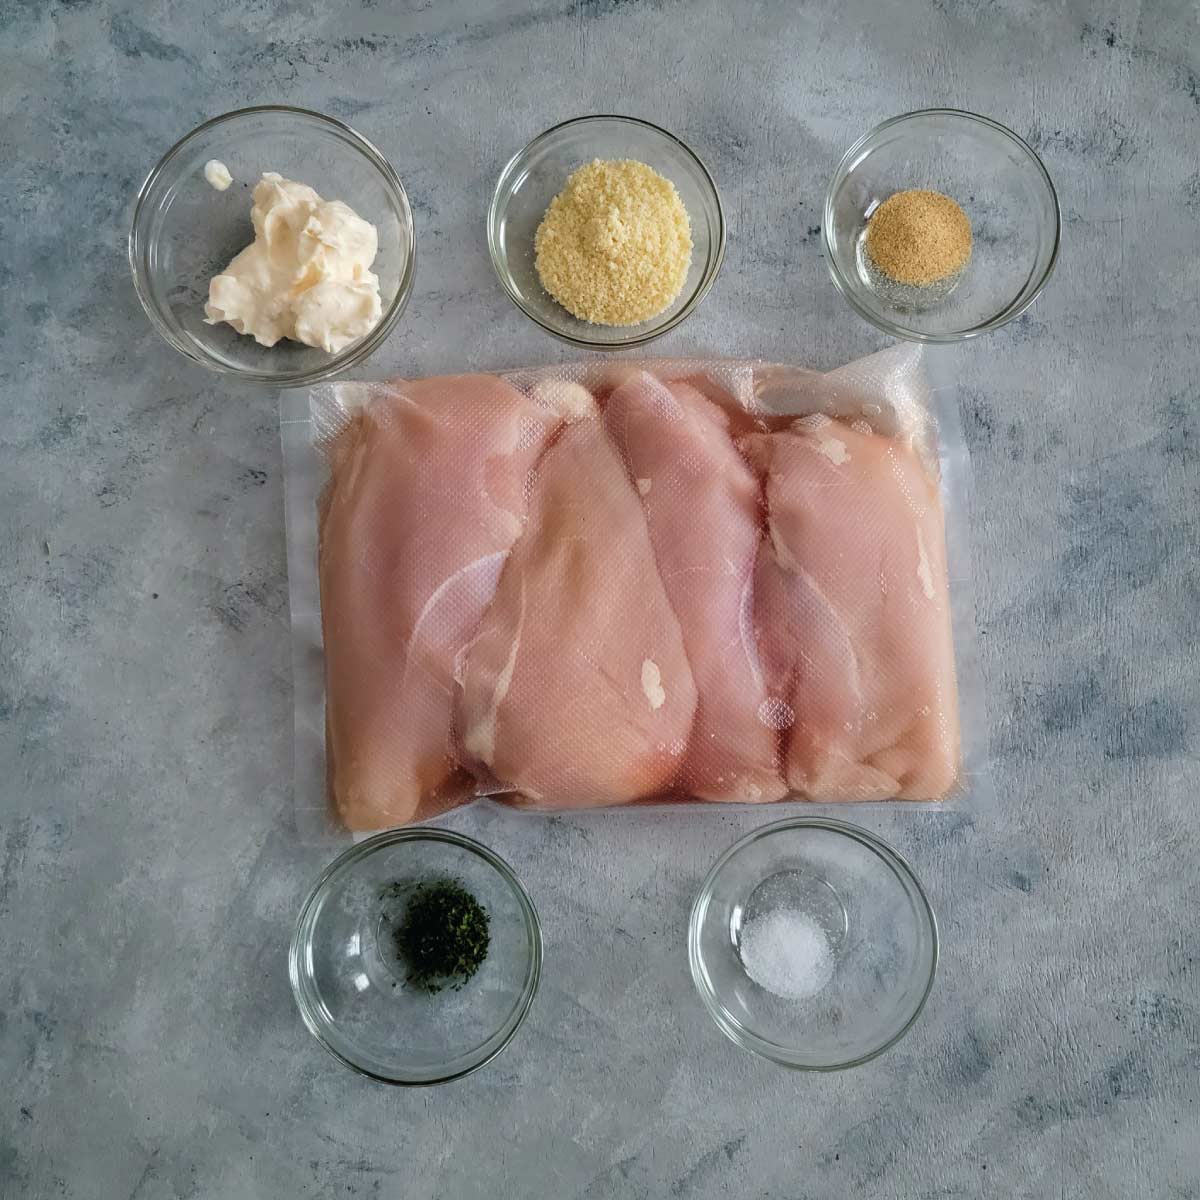 Ingredients prepped for the parmesan crusted chicken breasts.